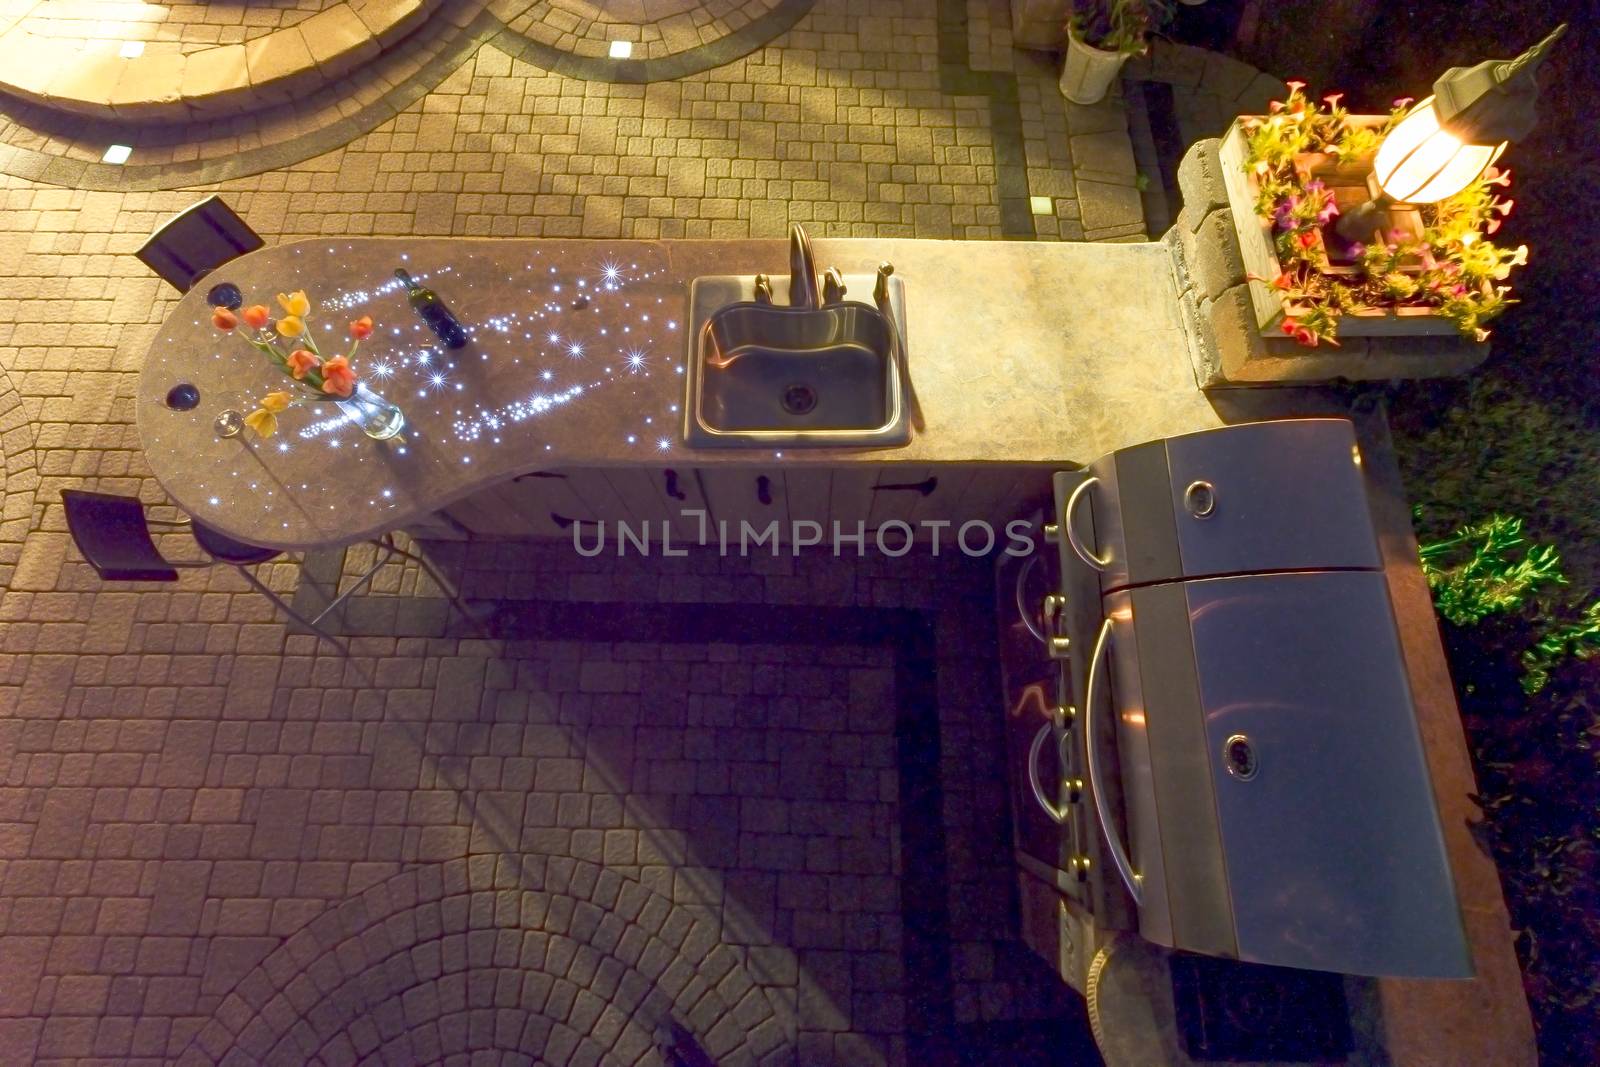 Night shot of above view of outdoor summer kitchen with a built in fiberoptic lights in custom cast concrete counter top in a corner of a brick paved patio.